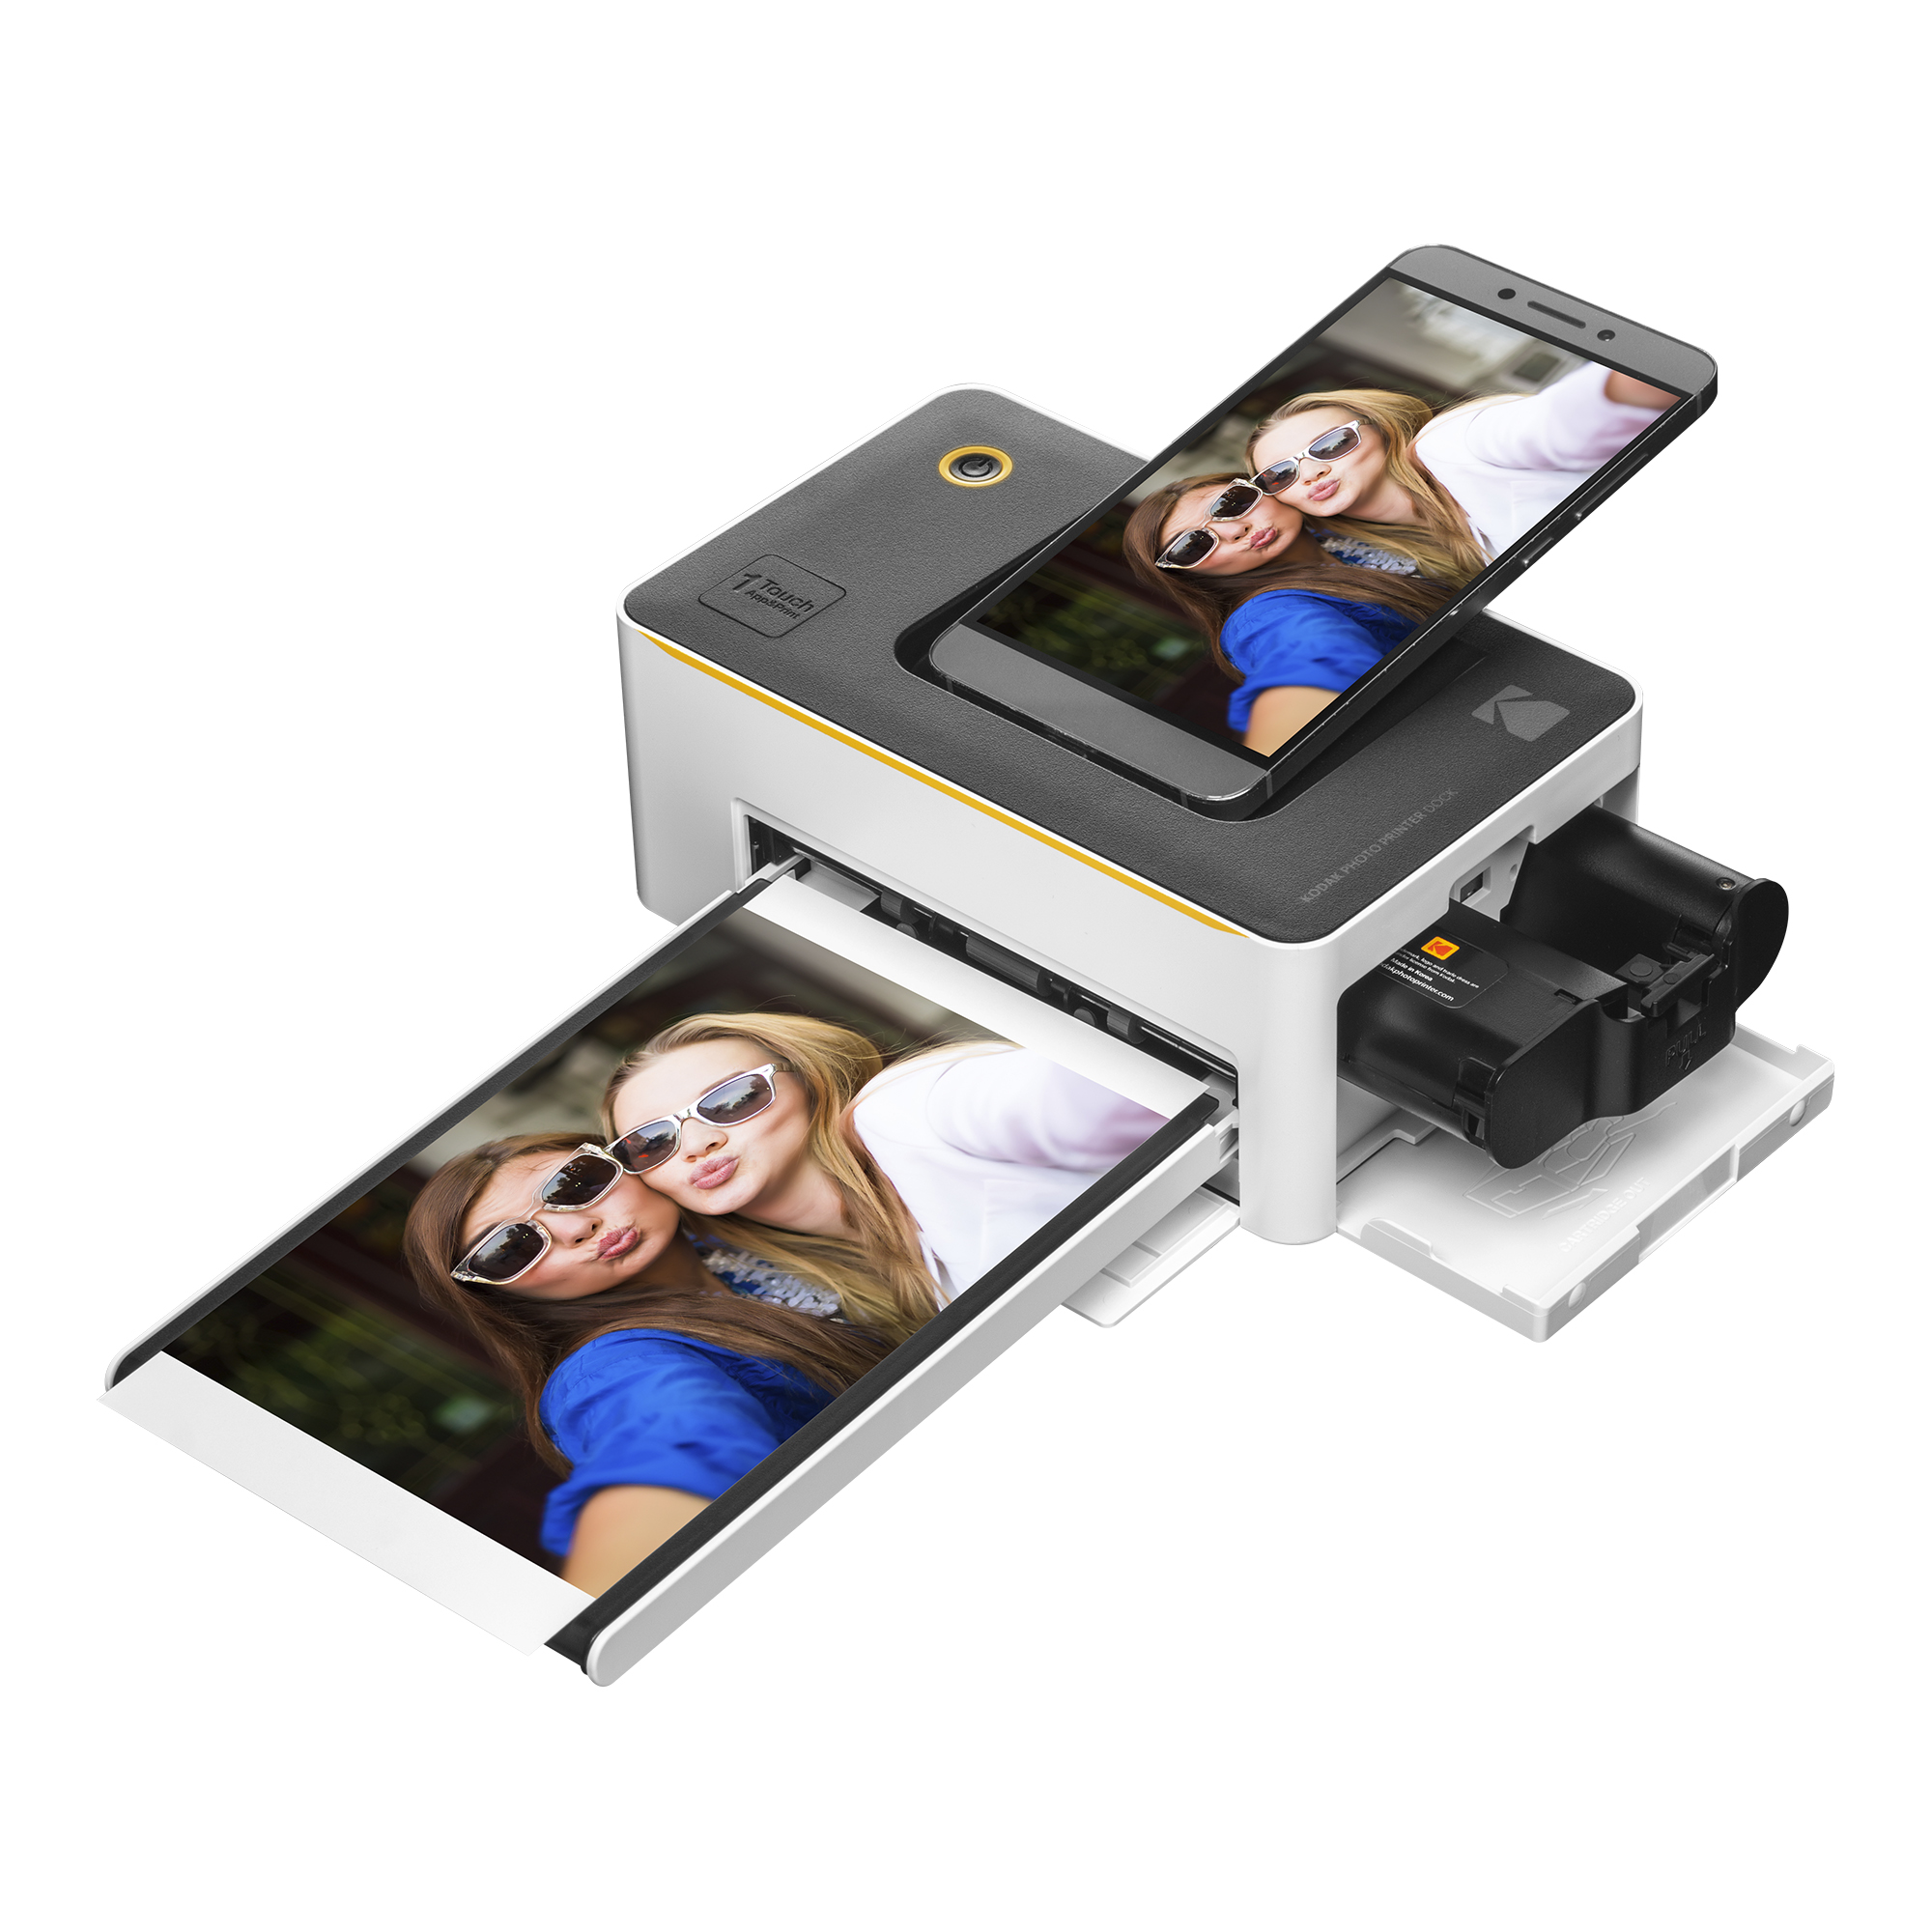 Kodak Dock Plus 4x6" Portable Photo Printer for iOS/Android, Gold PD450BT - image 2 of 4